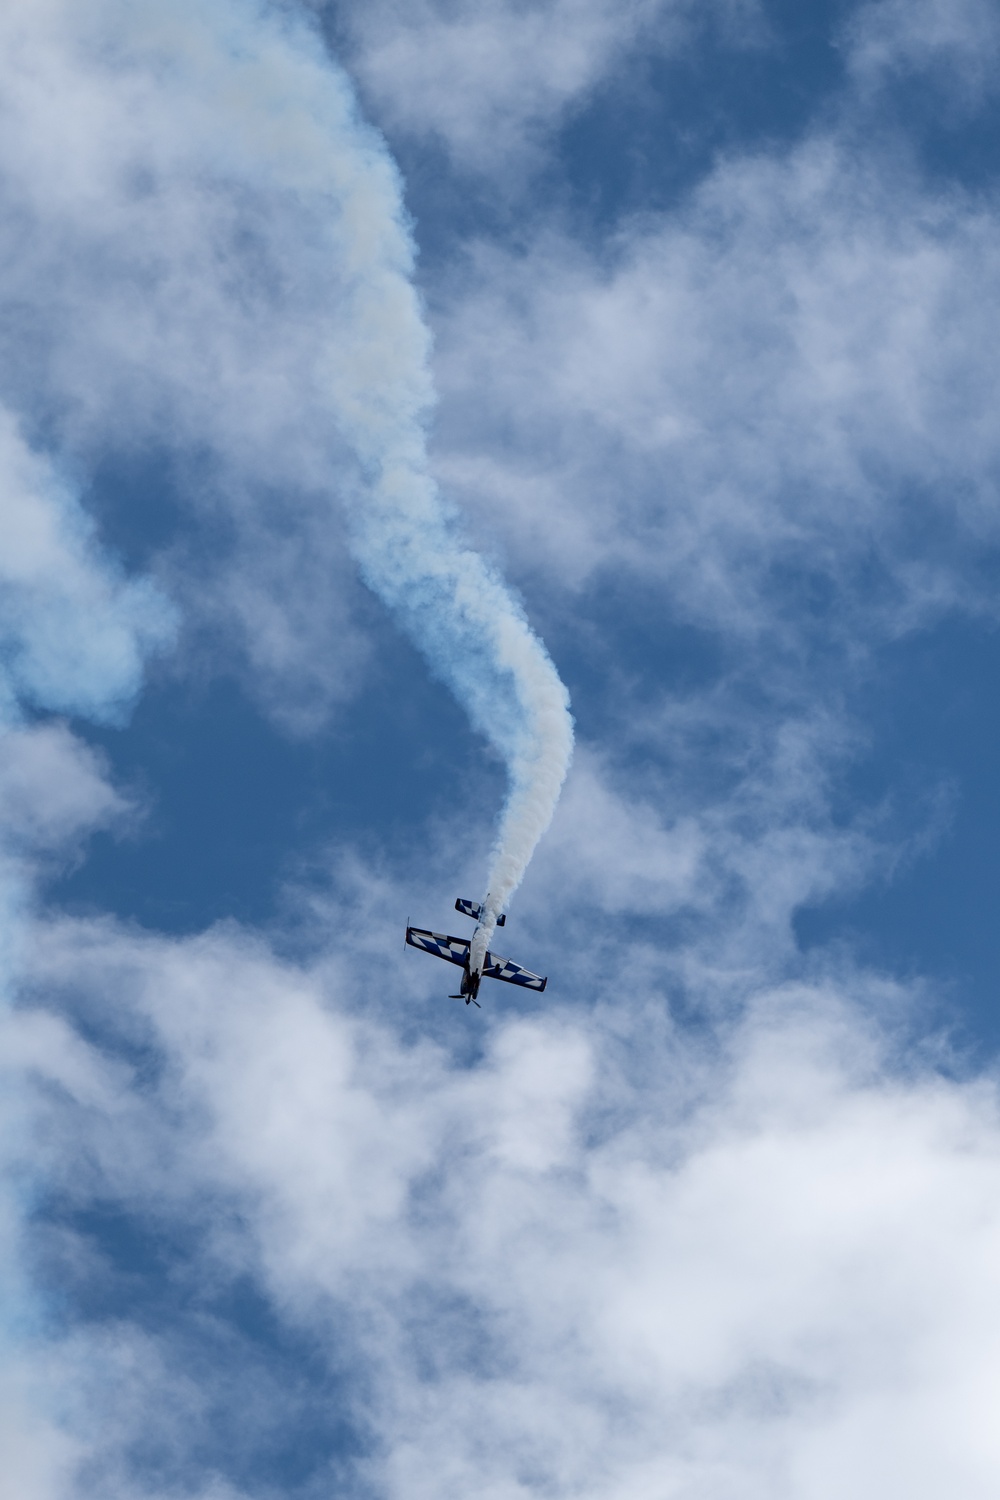 DVIDS Images 2023 Gowen Thunder Open House and Air Show [Image 6 of 36]